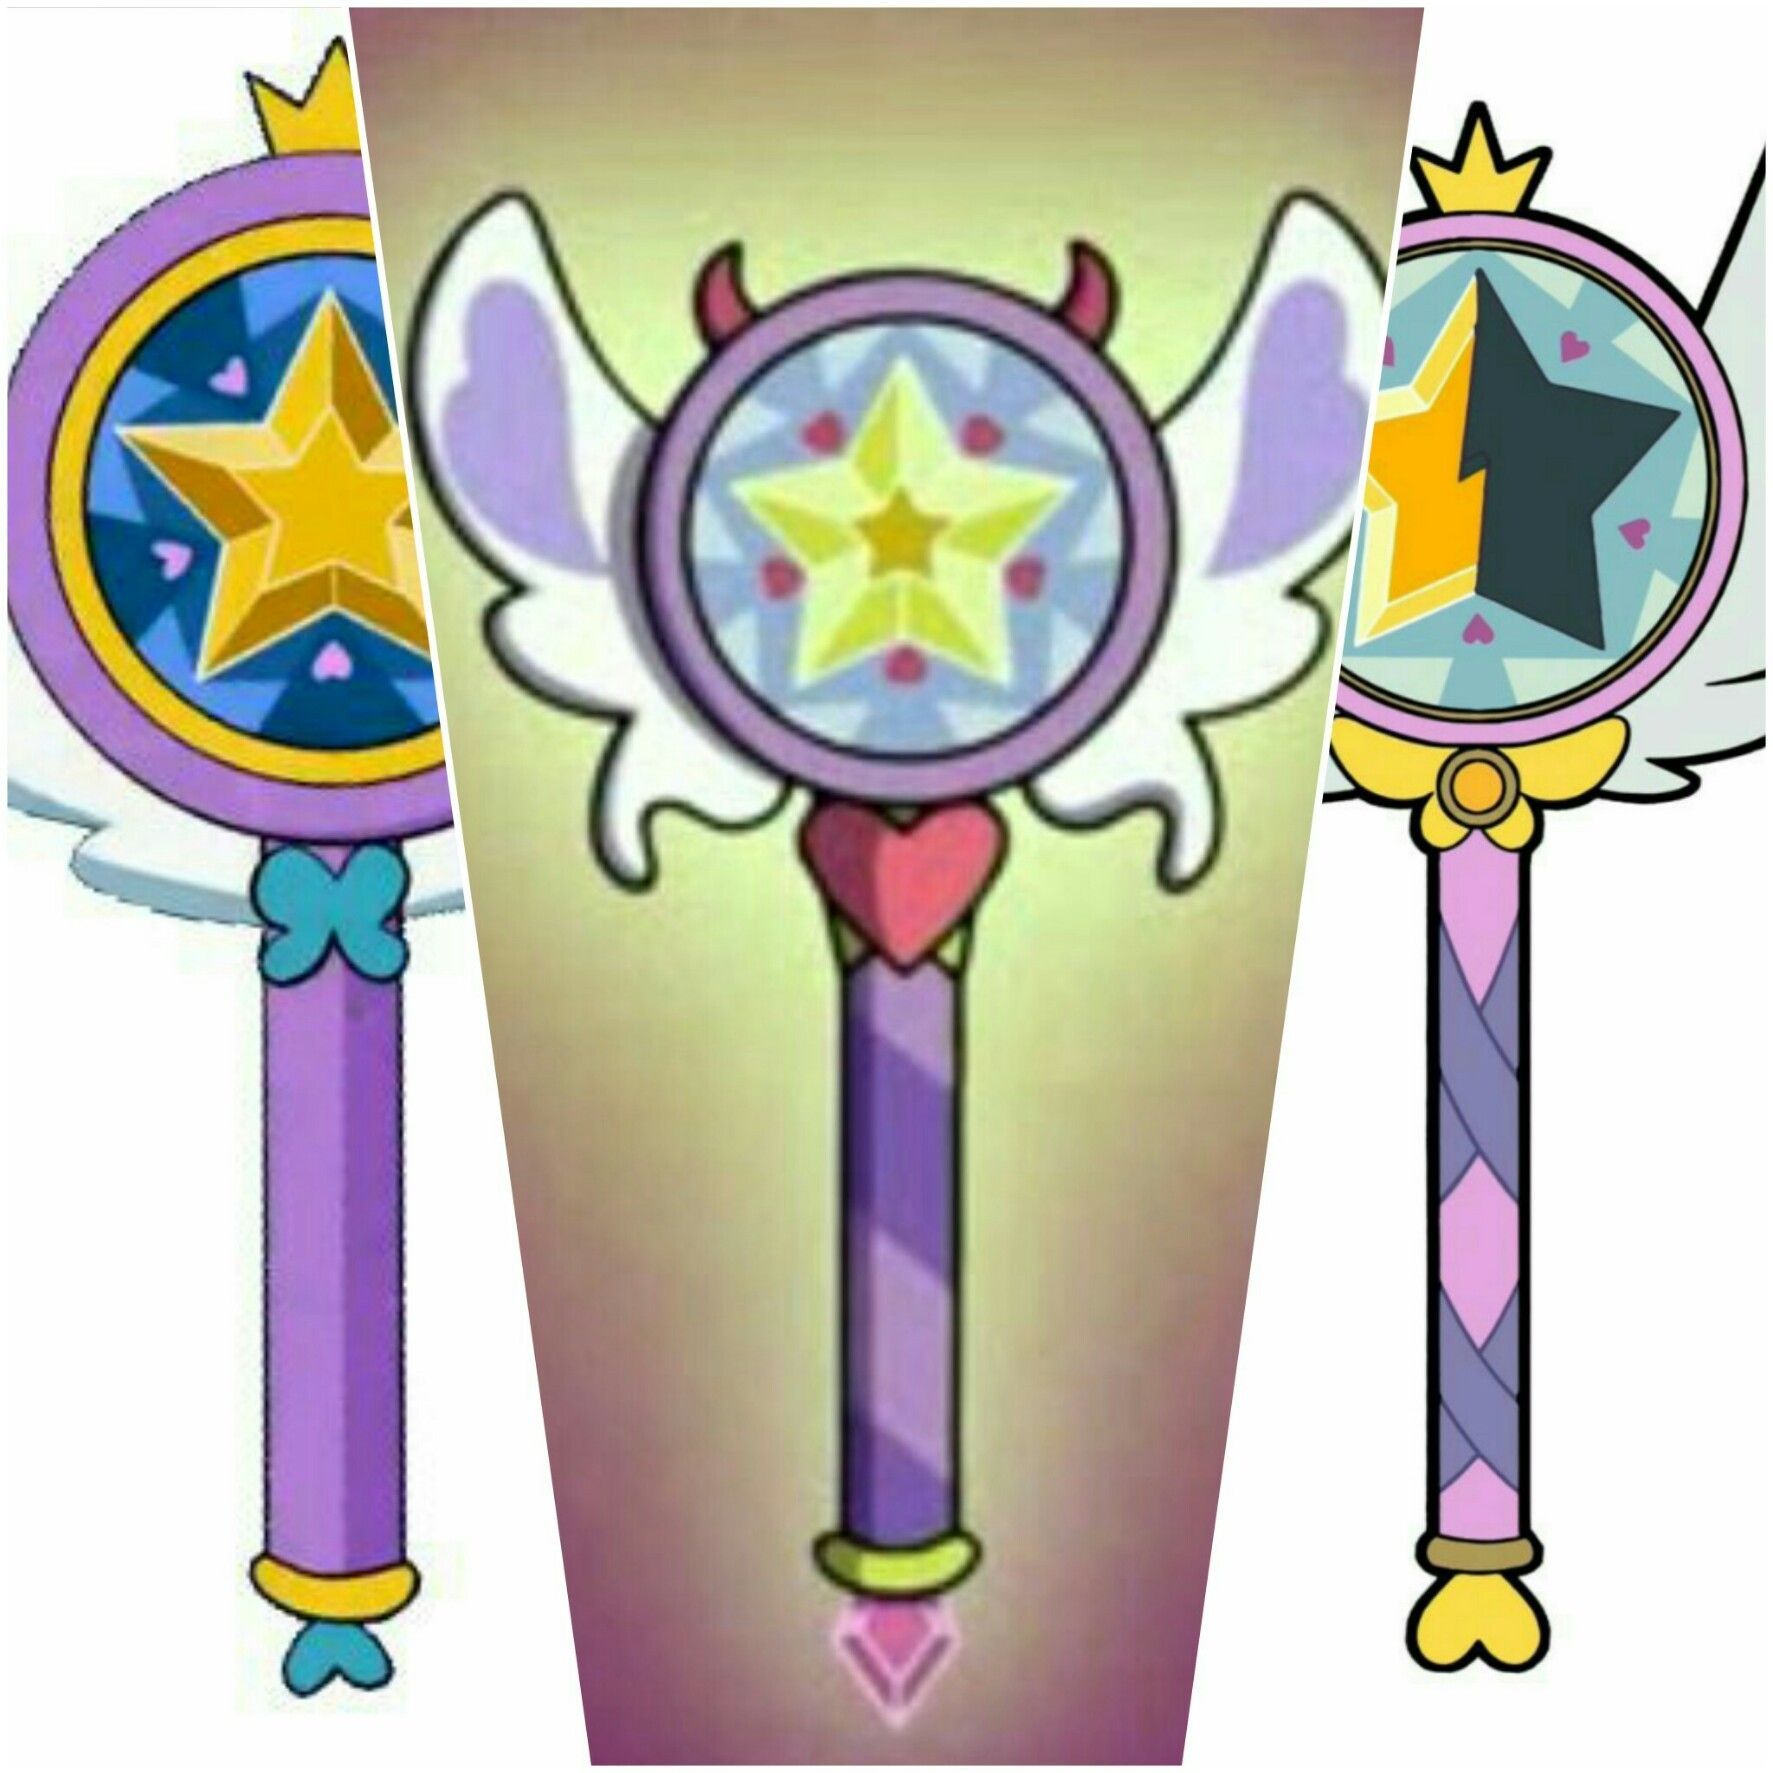 Star's Wands. Does anyone else notice she gets a new wand each season?. Star vs the forces of evil, Force of evil, Star vs the forces